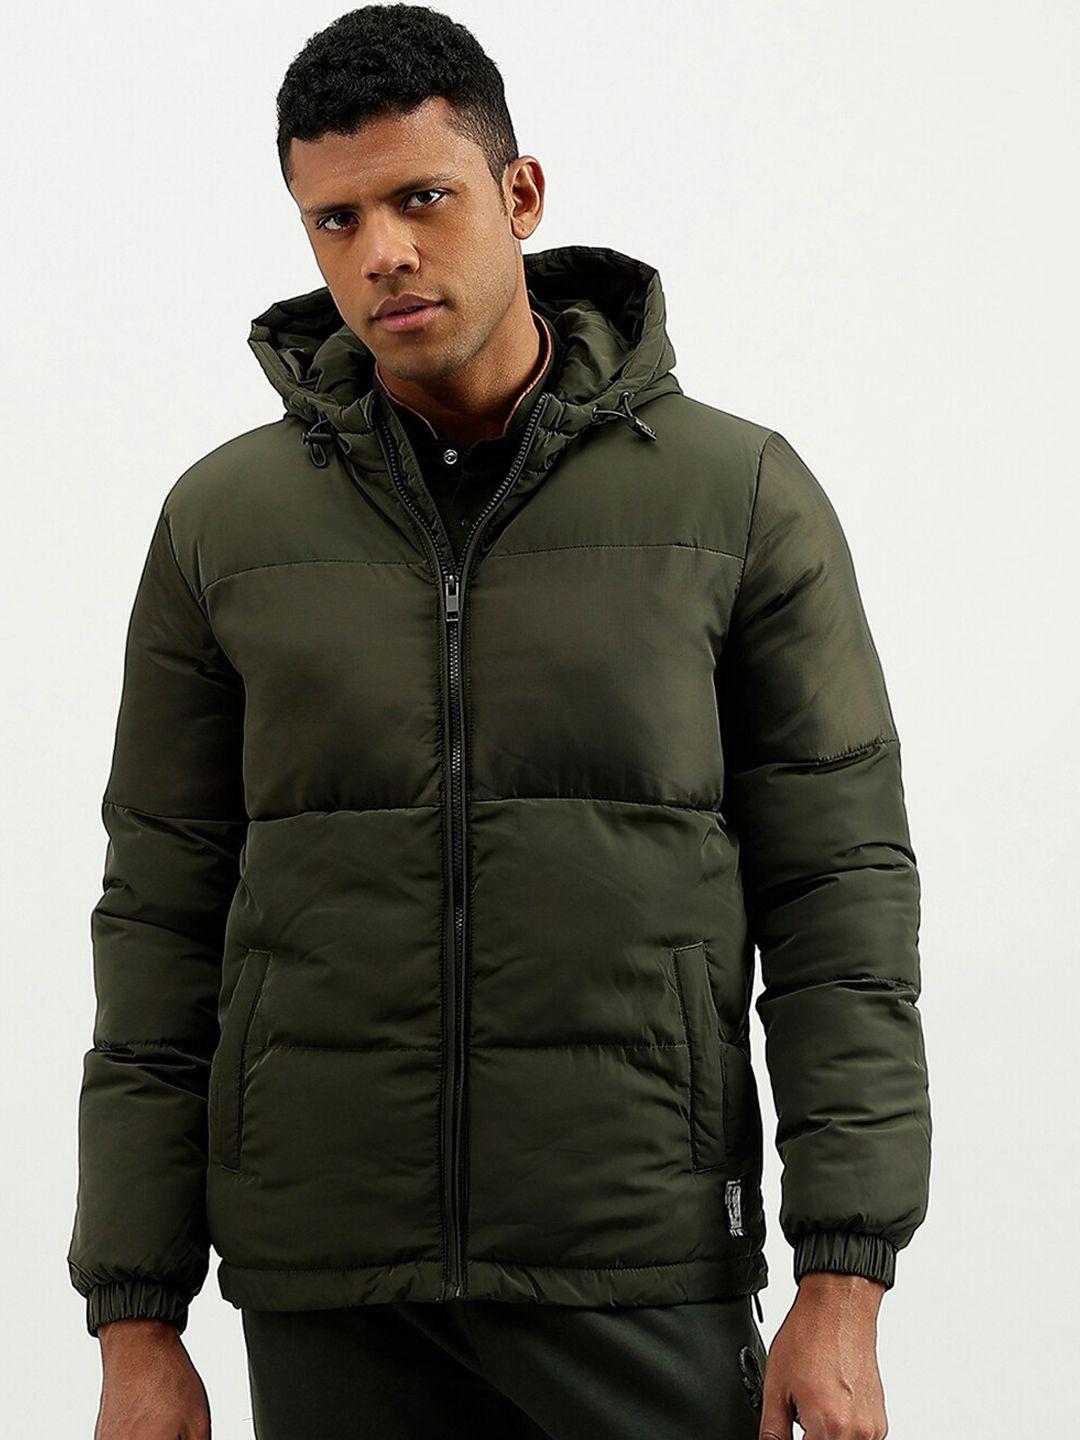 united-colors-of-benetton-men-olive-green-camouflage-colourblocked-padded-jacket